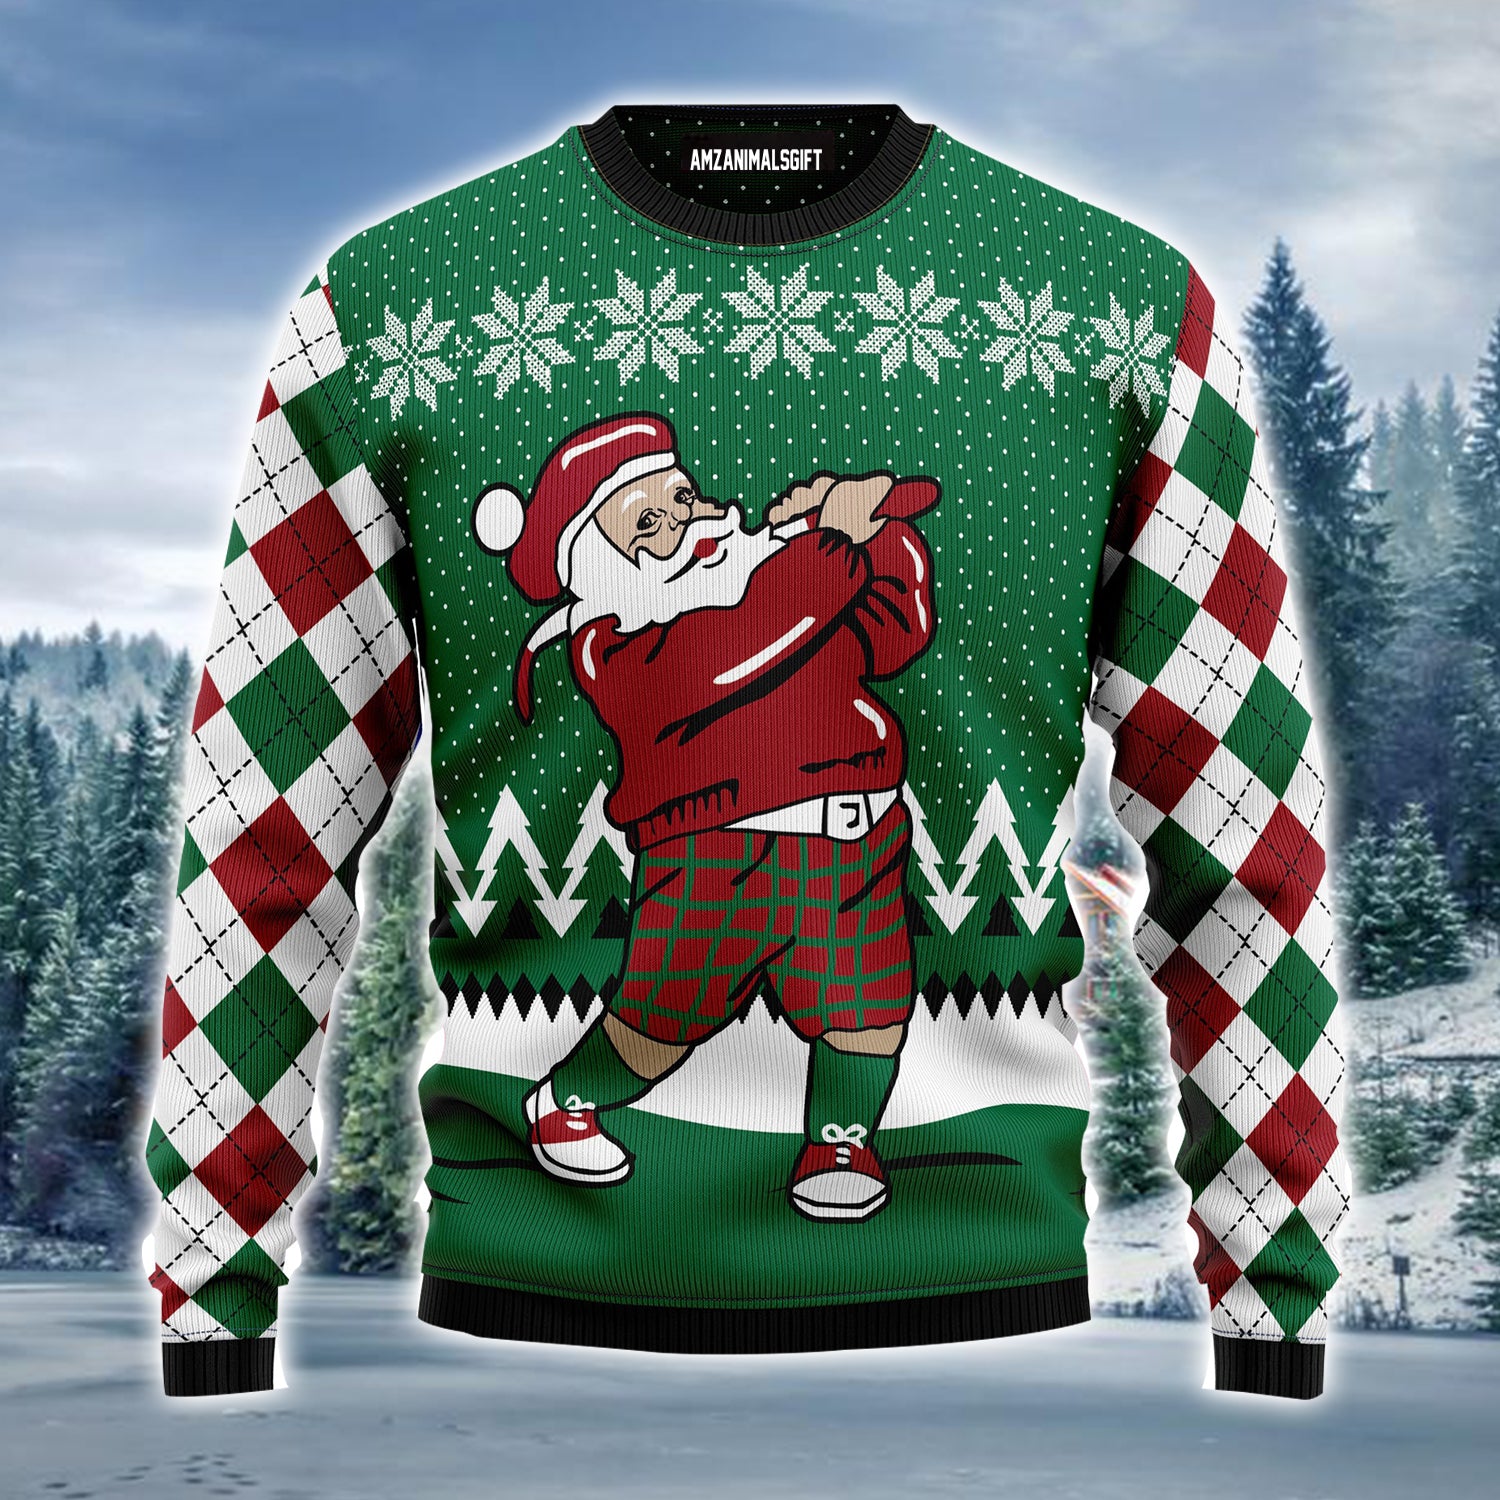 Golfer Santa Ugly Christmas Sweater, Santa Claus Plays Golf Ugly Sweater For Men & Women - Perfect Gift For Christmas, Golf Lovers, Golf Players